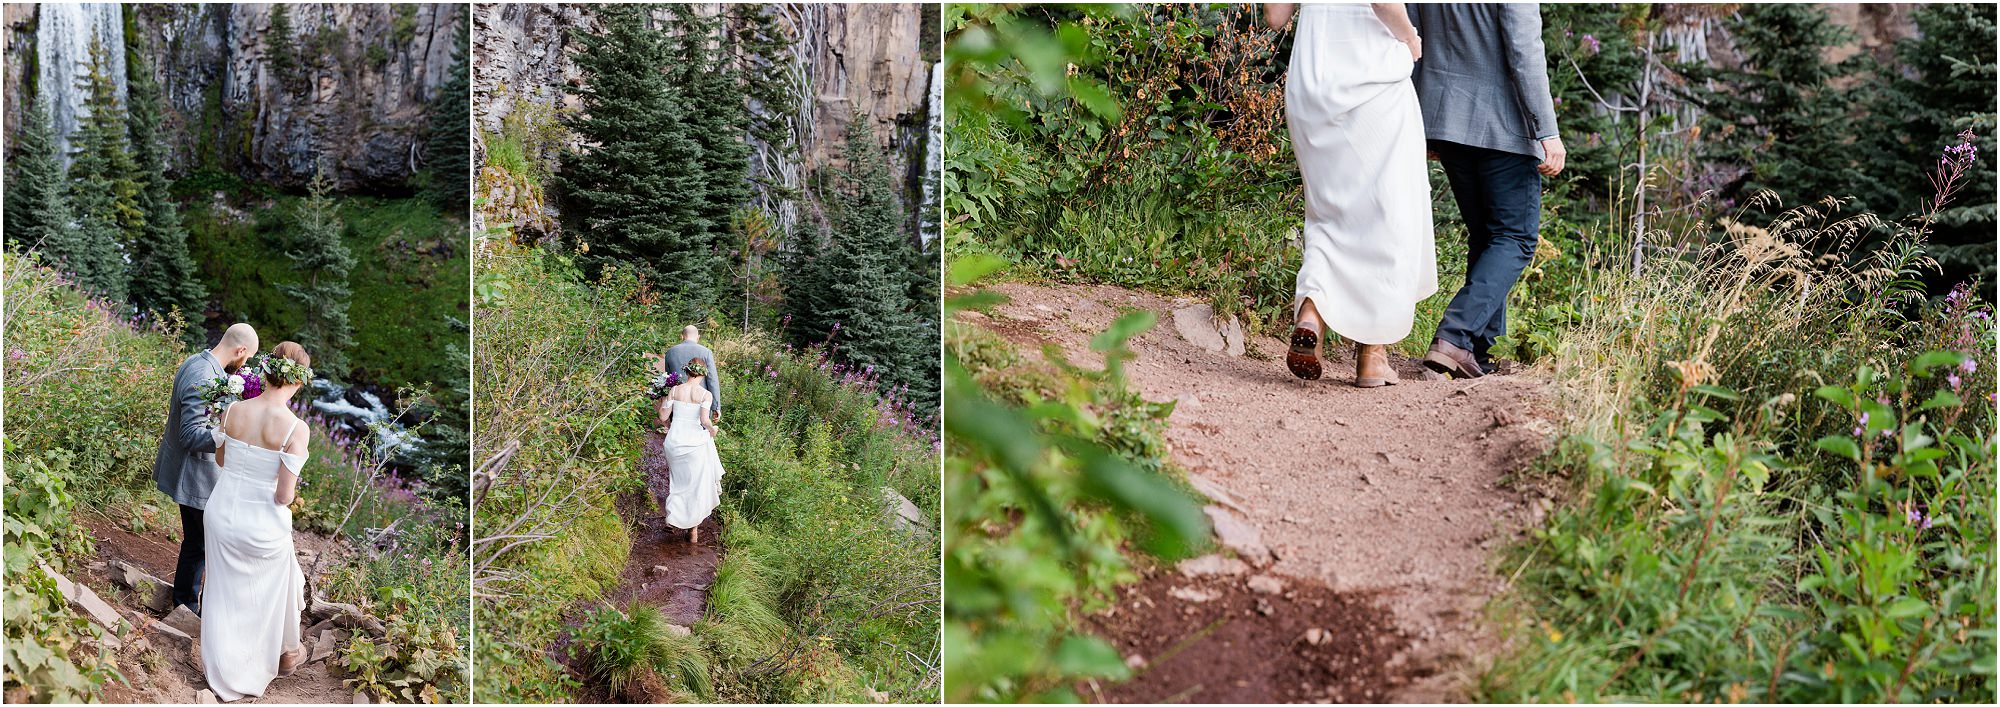 A couple hikes the narrow trail down the hillside towards Tumalo Falls in their wedding clothes. | Erica Swantek Photography